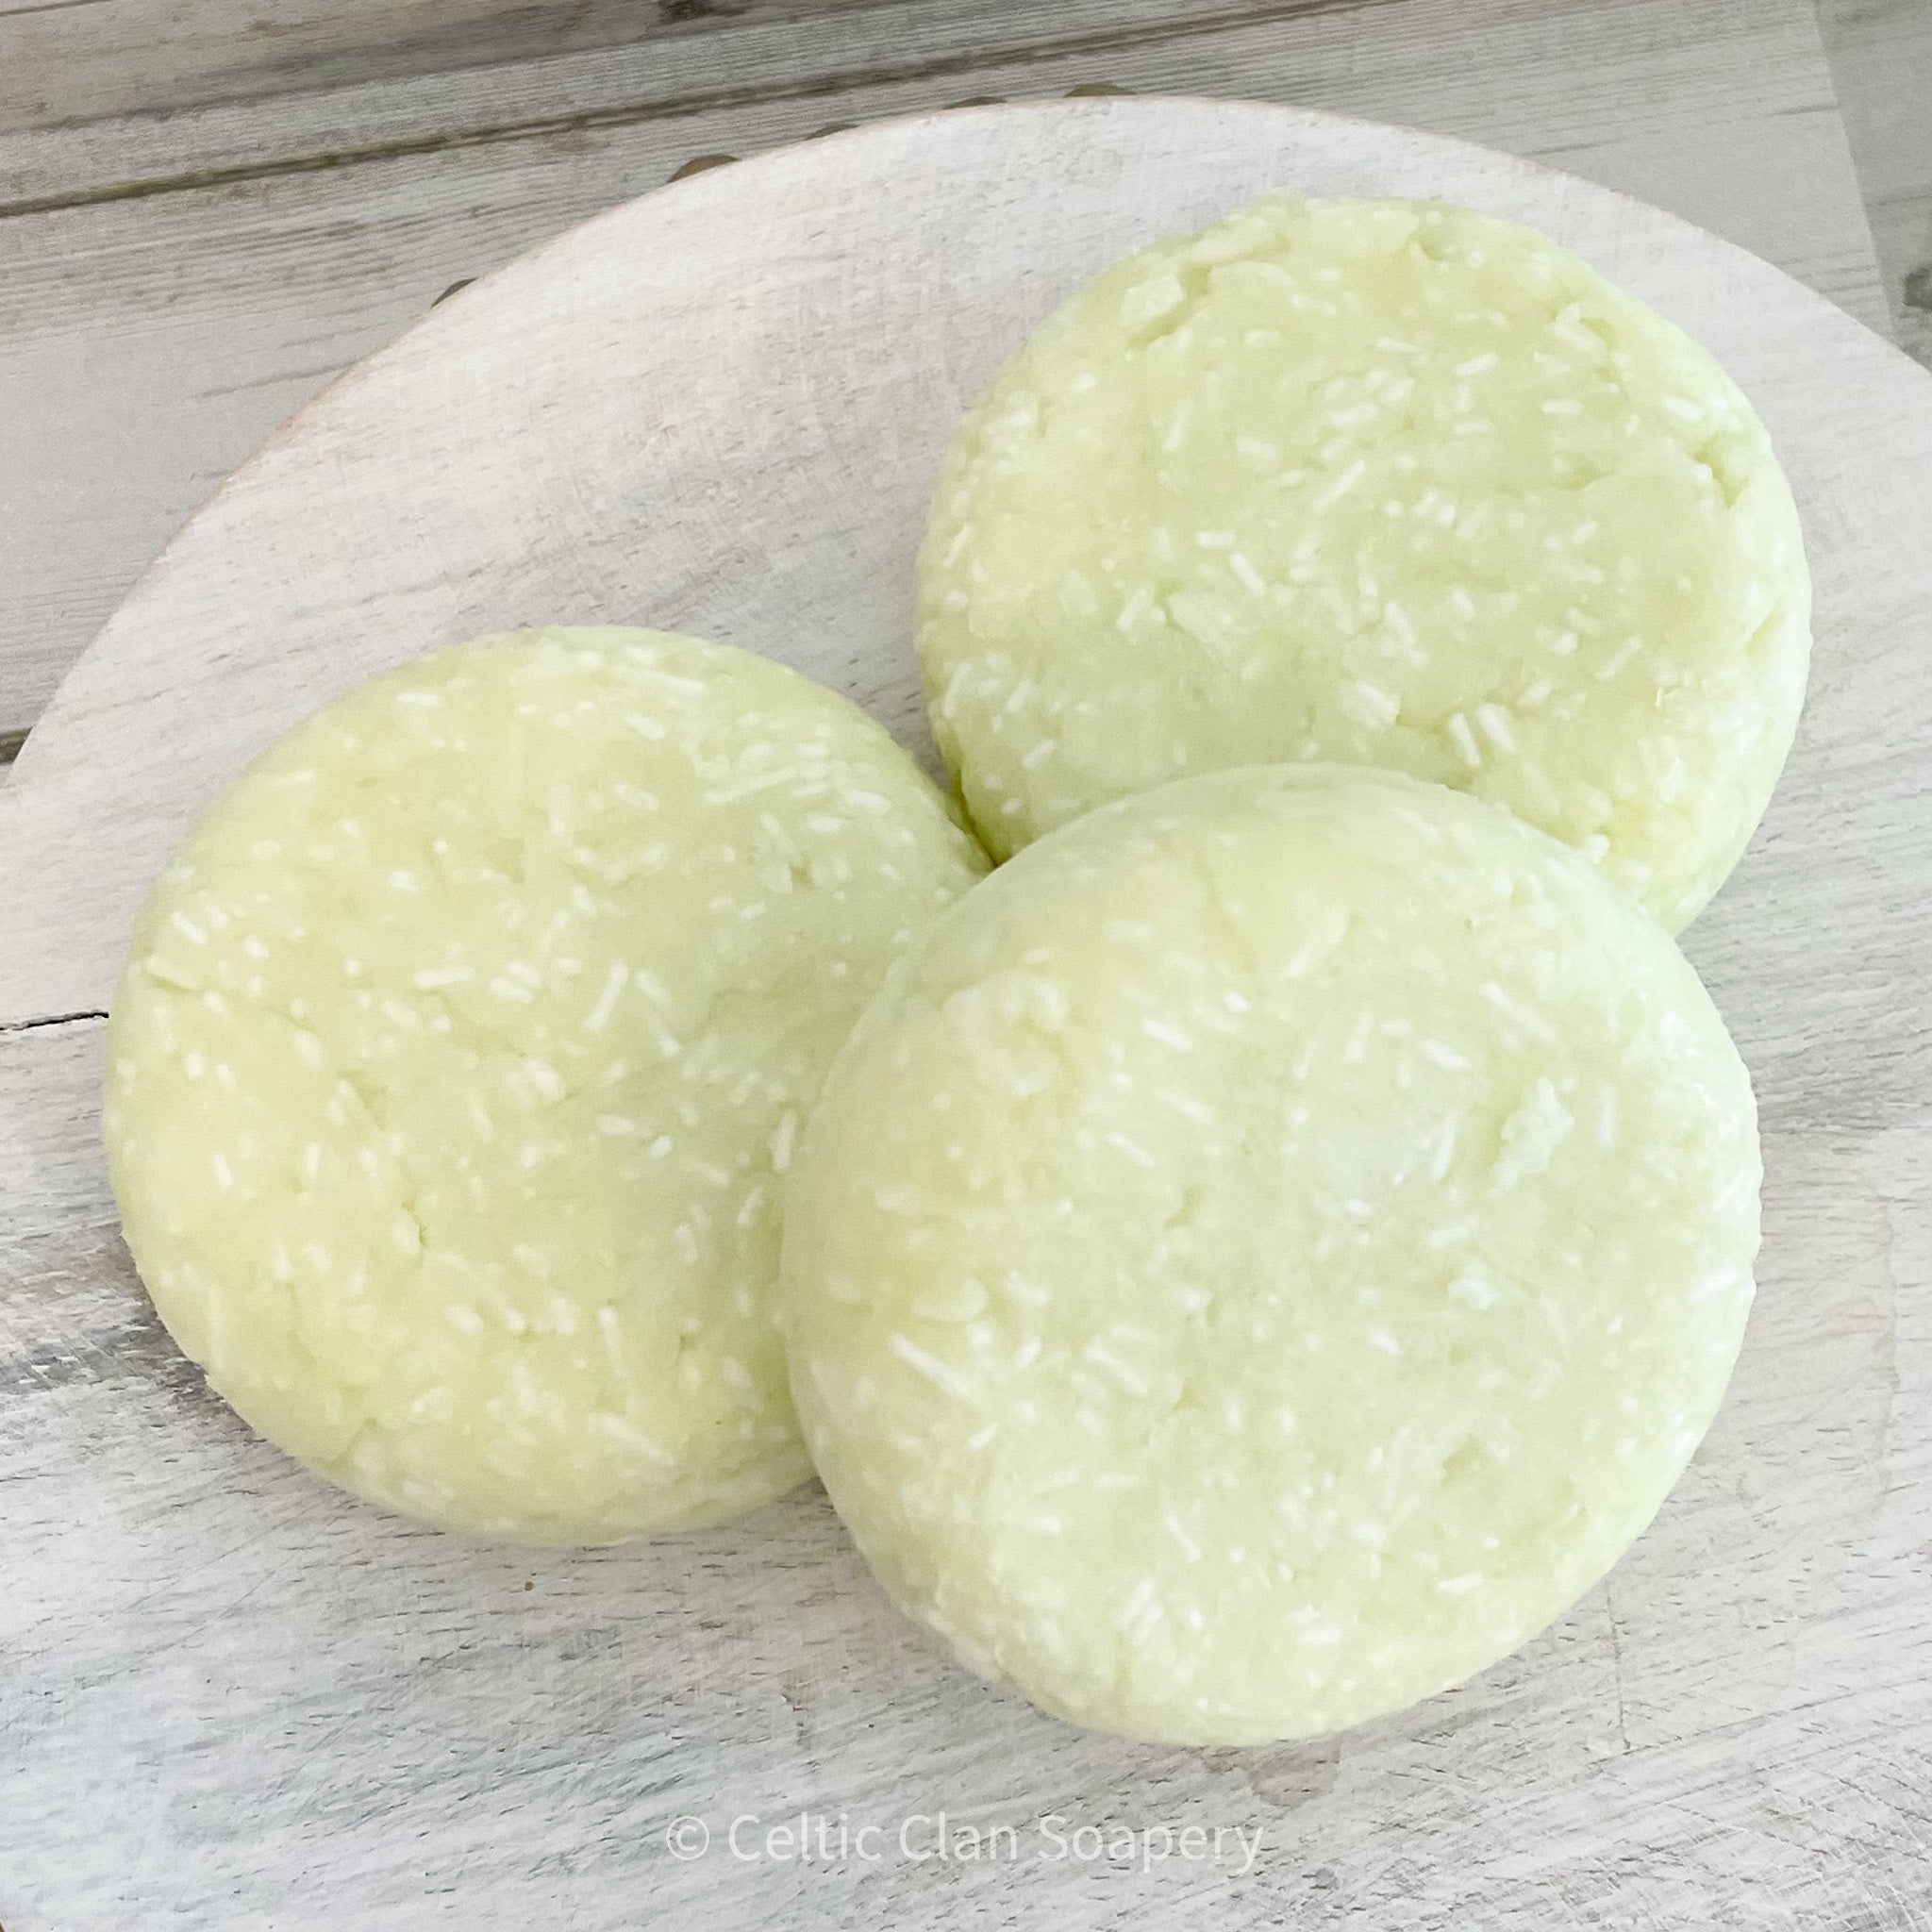 Celtic Clan Soapery sulfate free shampoo bars essential oil